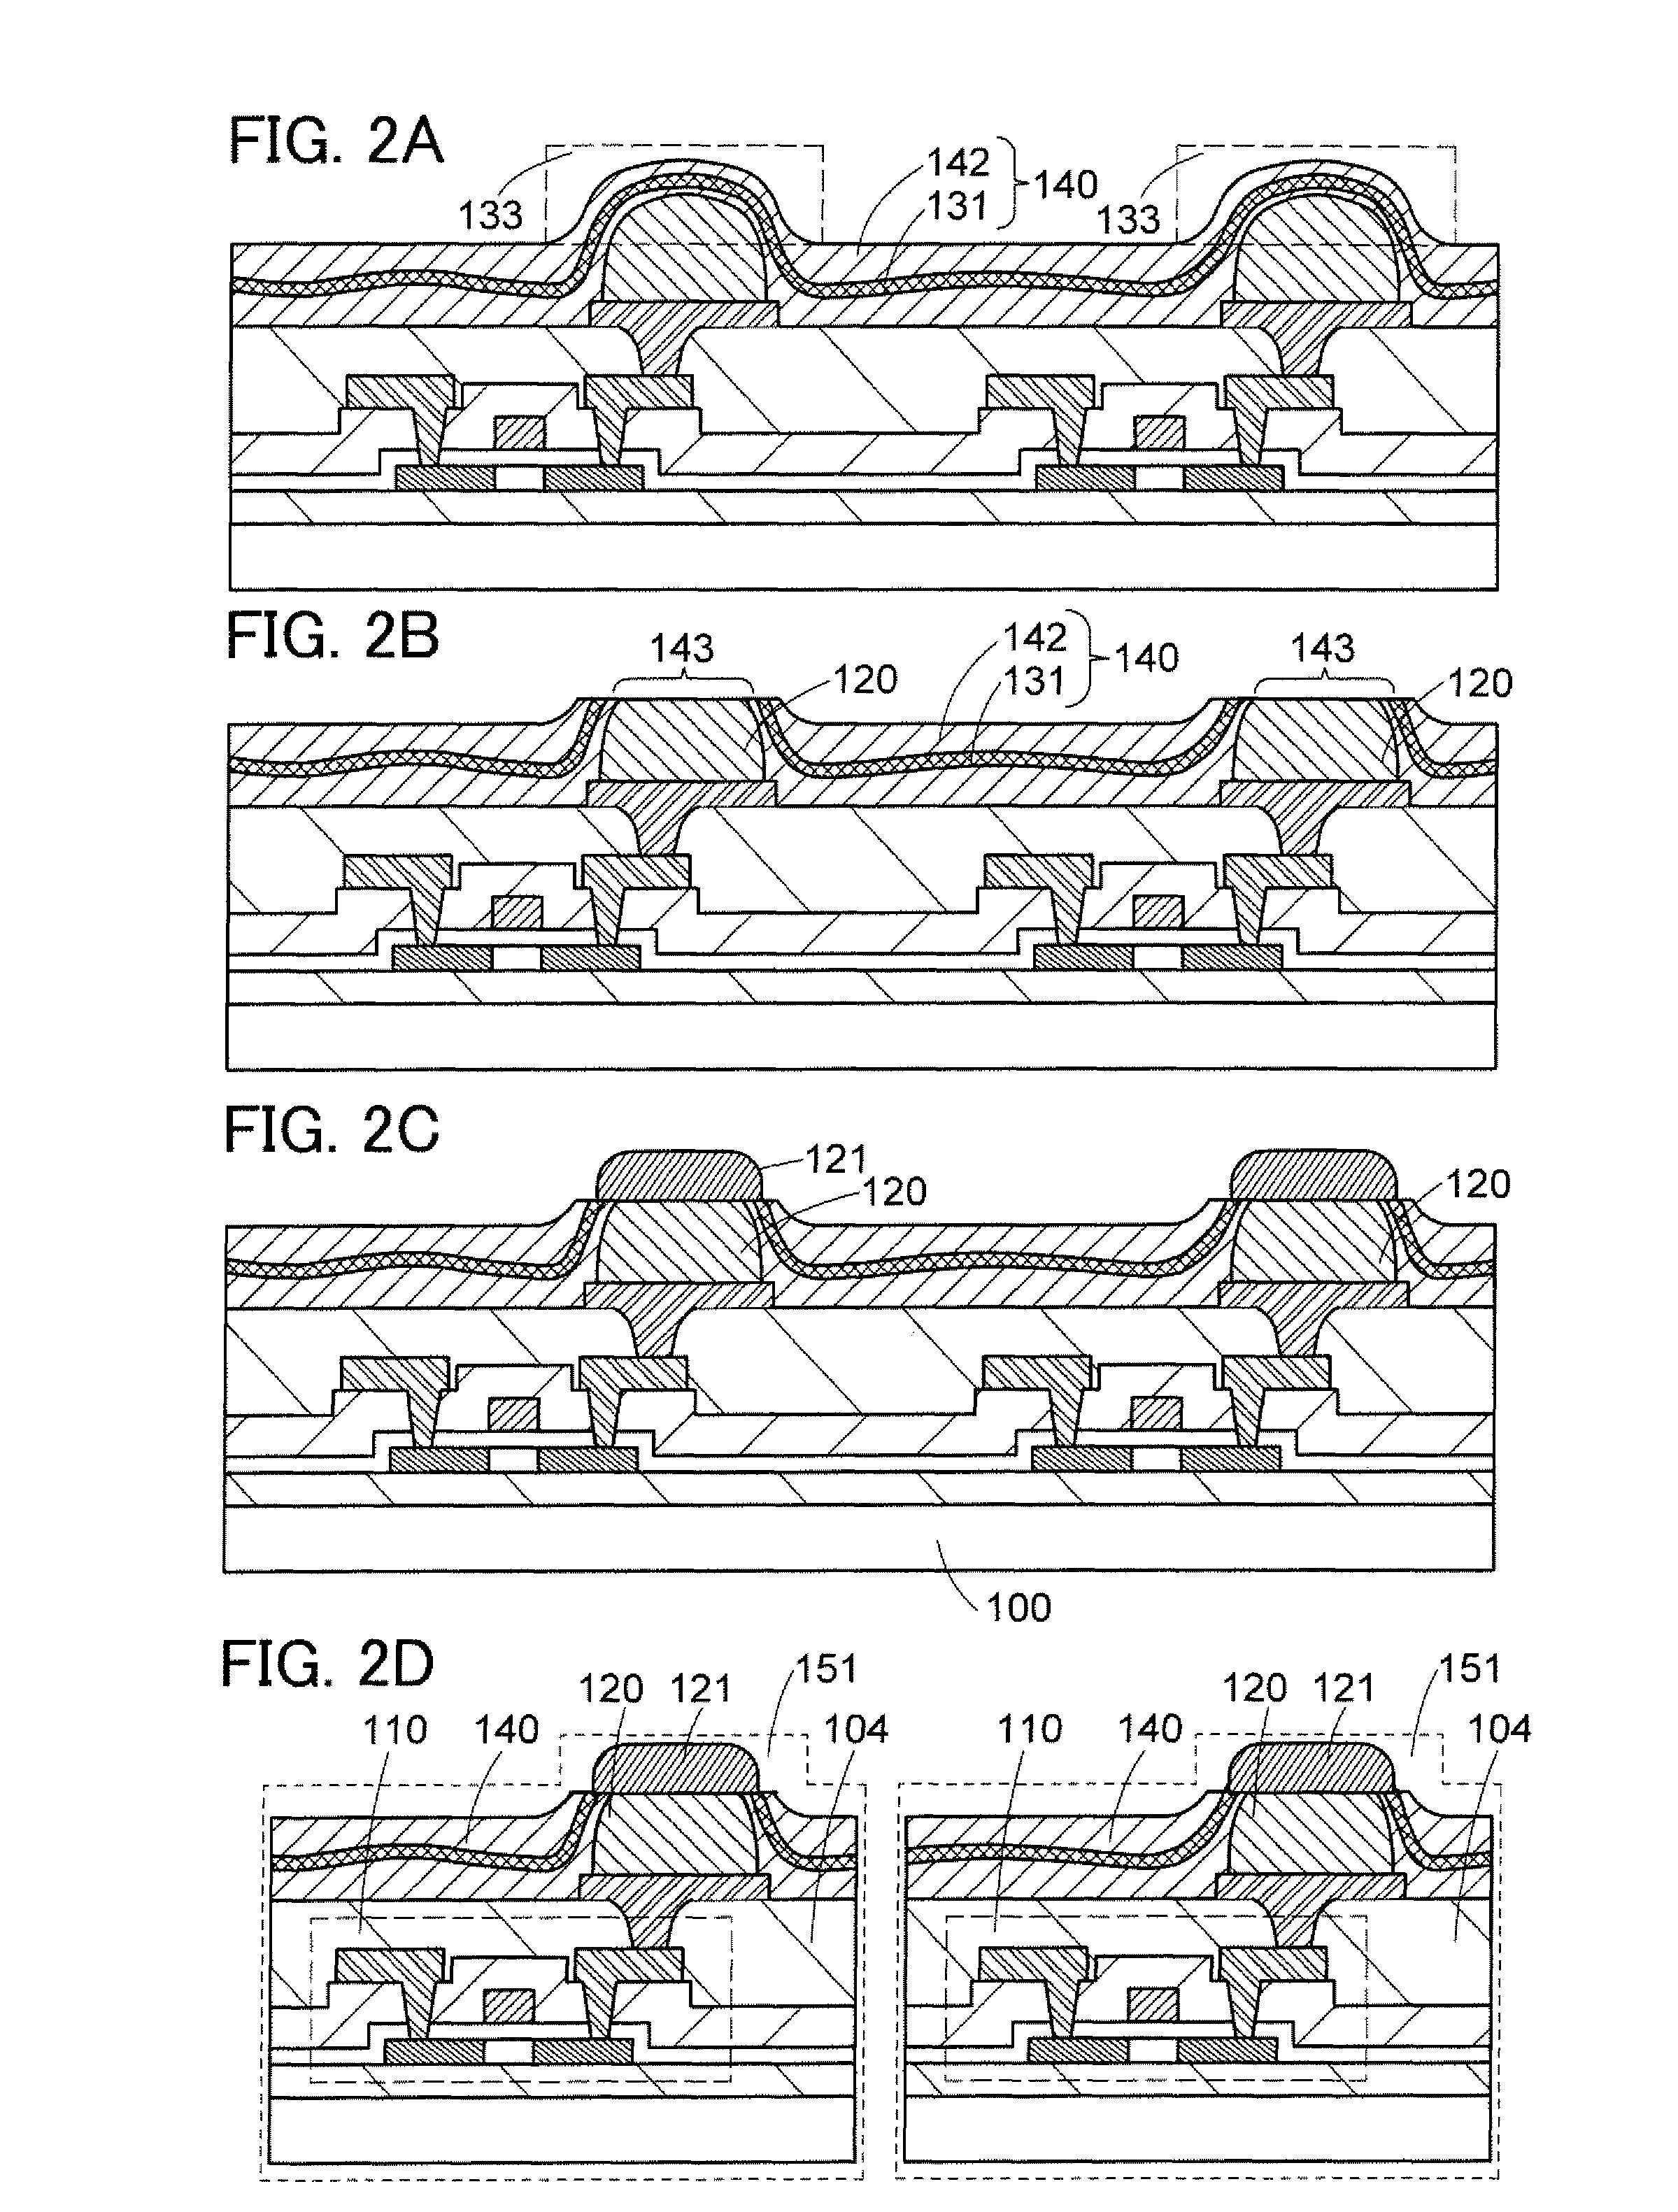 Method for manufacturing electronic device